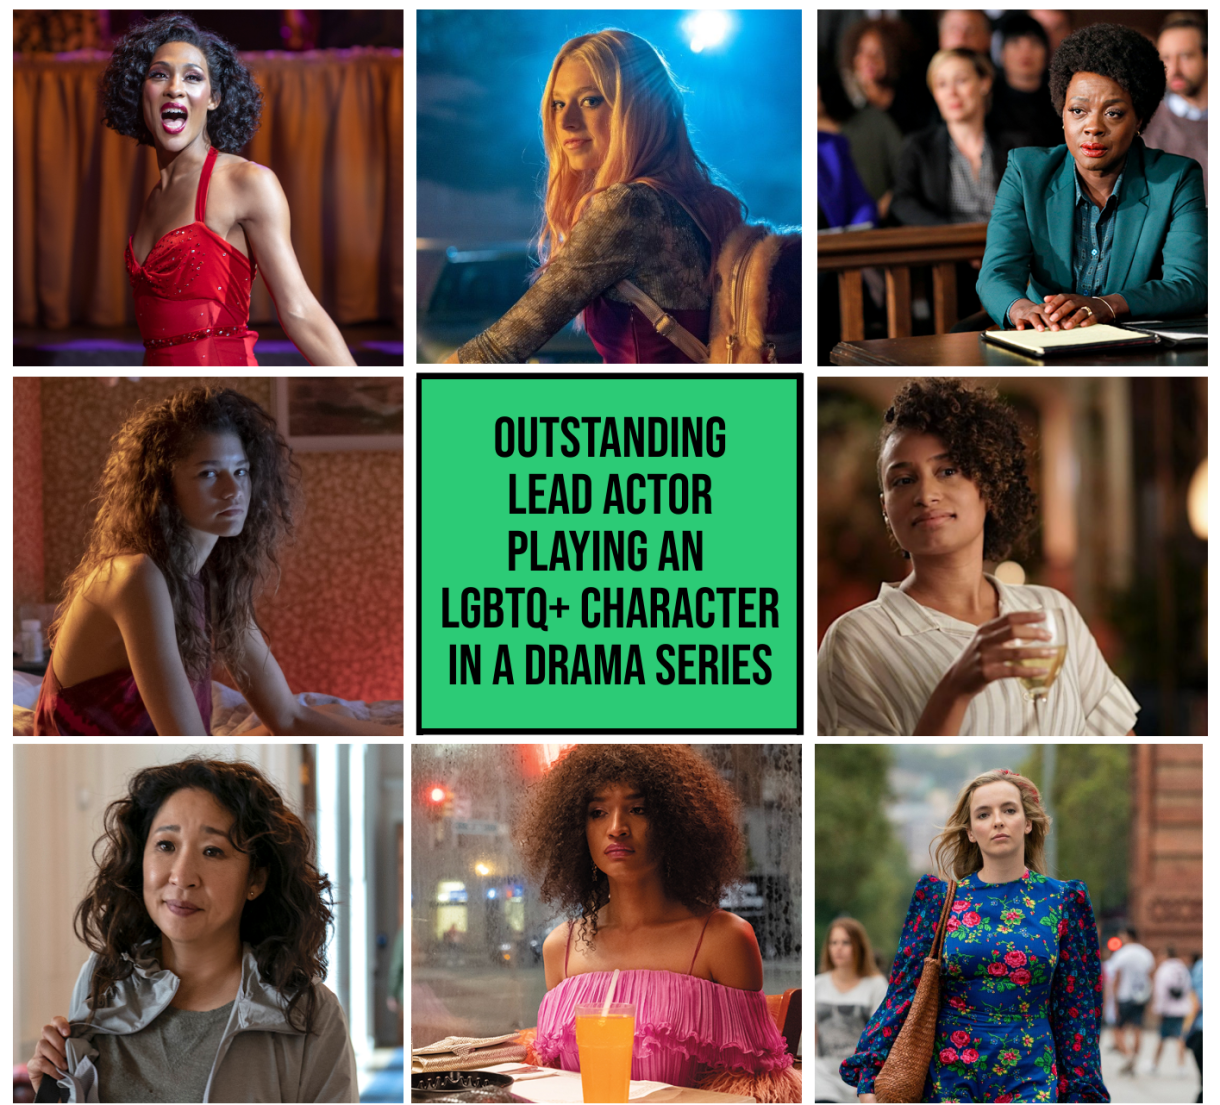 Top Row: MJ Rodriguez as Blanca, Pose (FX)  // Hunter Schafer as Jules, Euphoria (HBO)  // Annalise Keating in How to Get Away With Murder (ABC) 
Middle Row: Zendaya as Rue, Euphoria (HBO) // Green Box reading "Outstanding Actor Playing an LGBTQ+ Character in a Drama Series" // Roseanny Zayas as Sophie Suarez, The L Word: Generation Q (Showtime)  
Bottom Row: Sandra Oh as Eve Polastri, Killing Eve (BBC) // Indya Moore as Angel, Pose (FX) // Jodi Comer as Villanelle, Killing Eve (BBC)